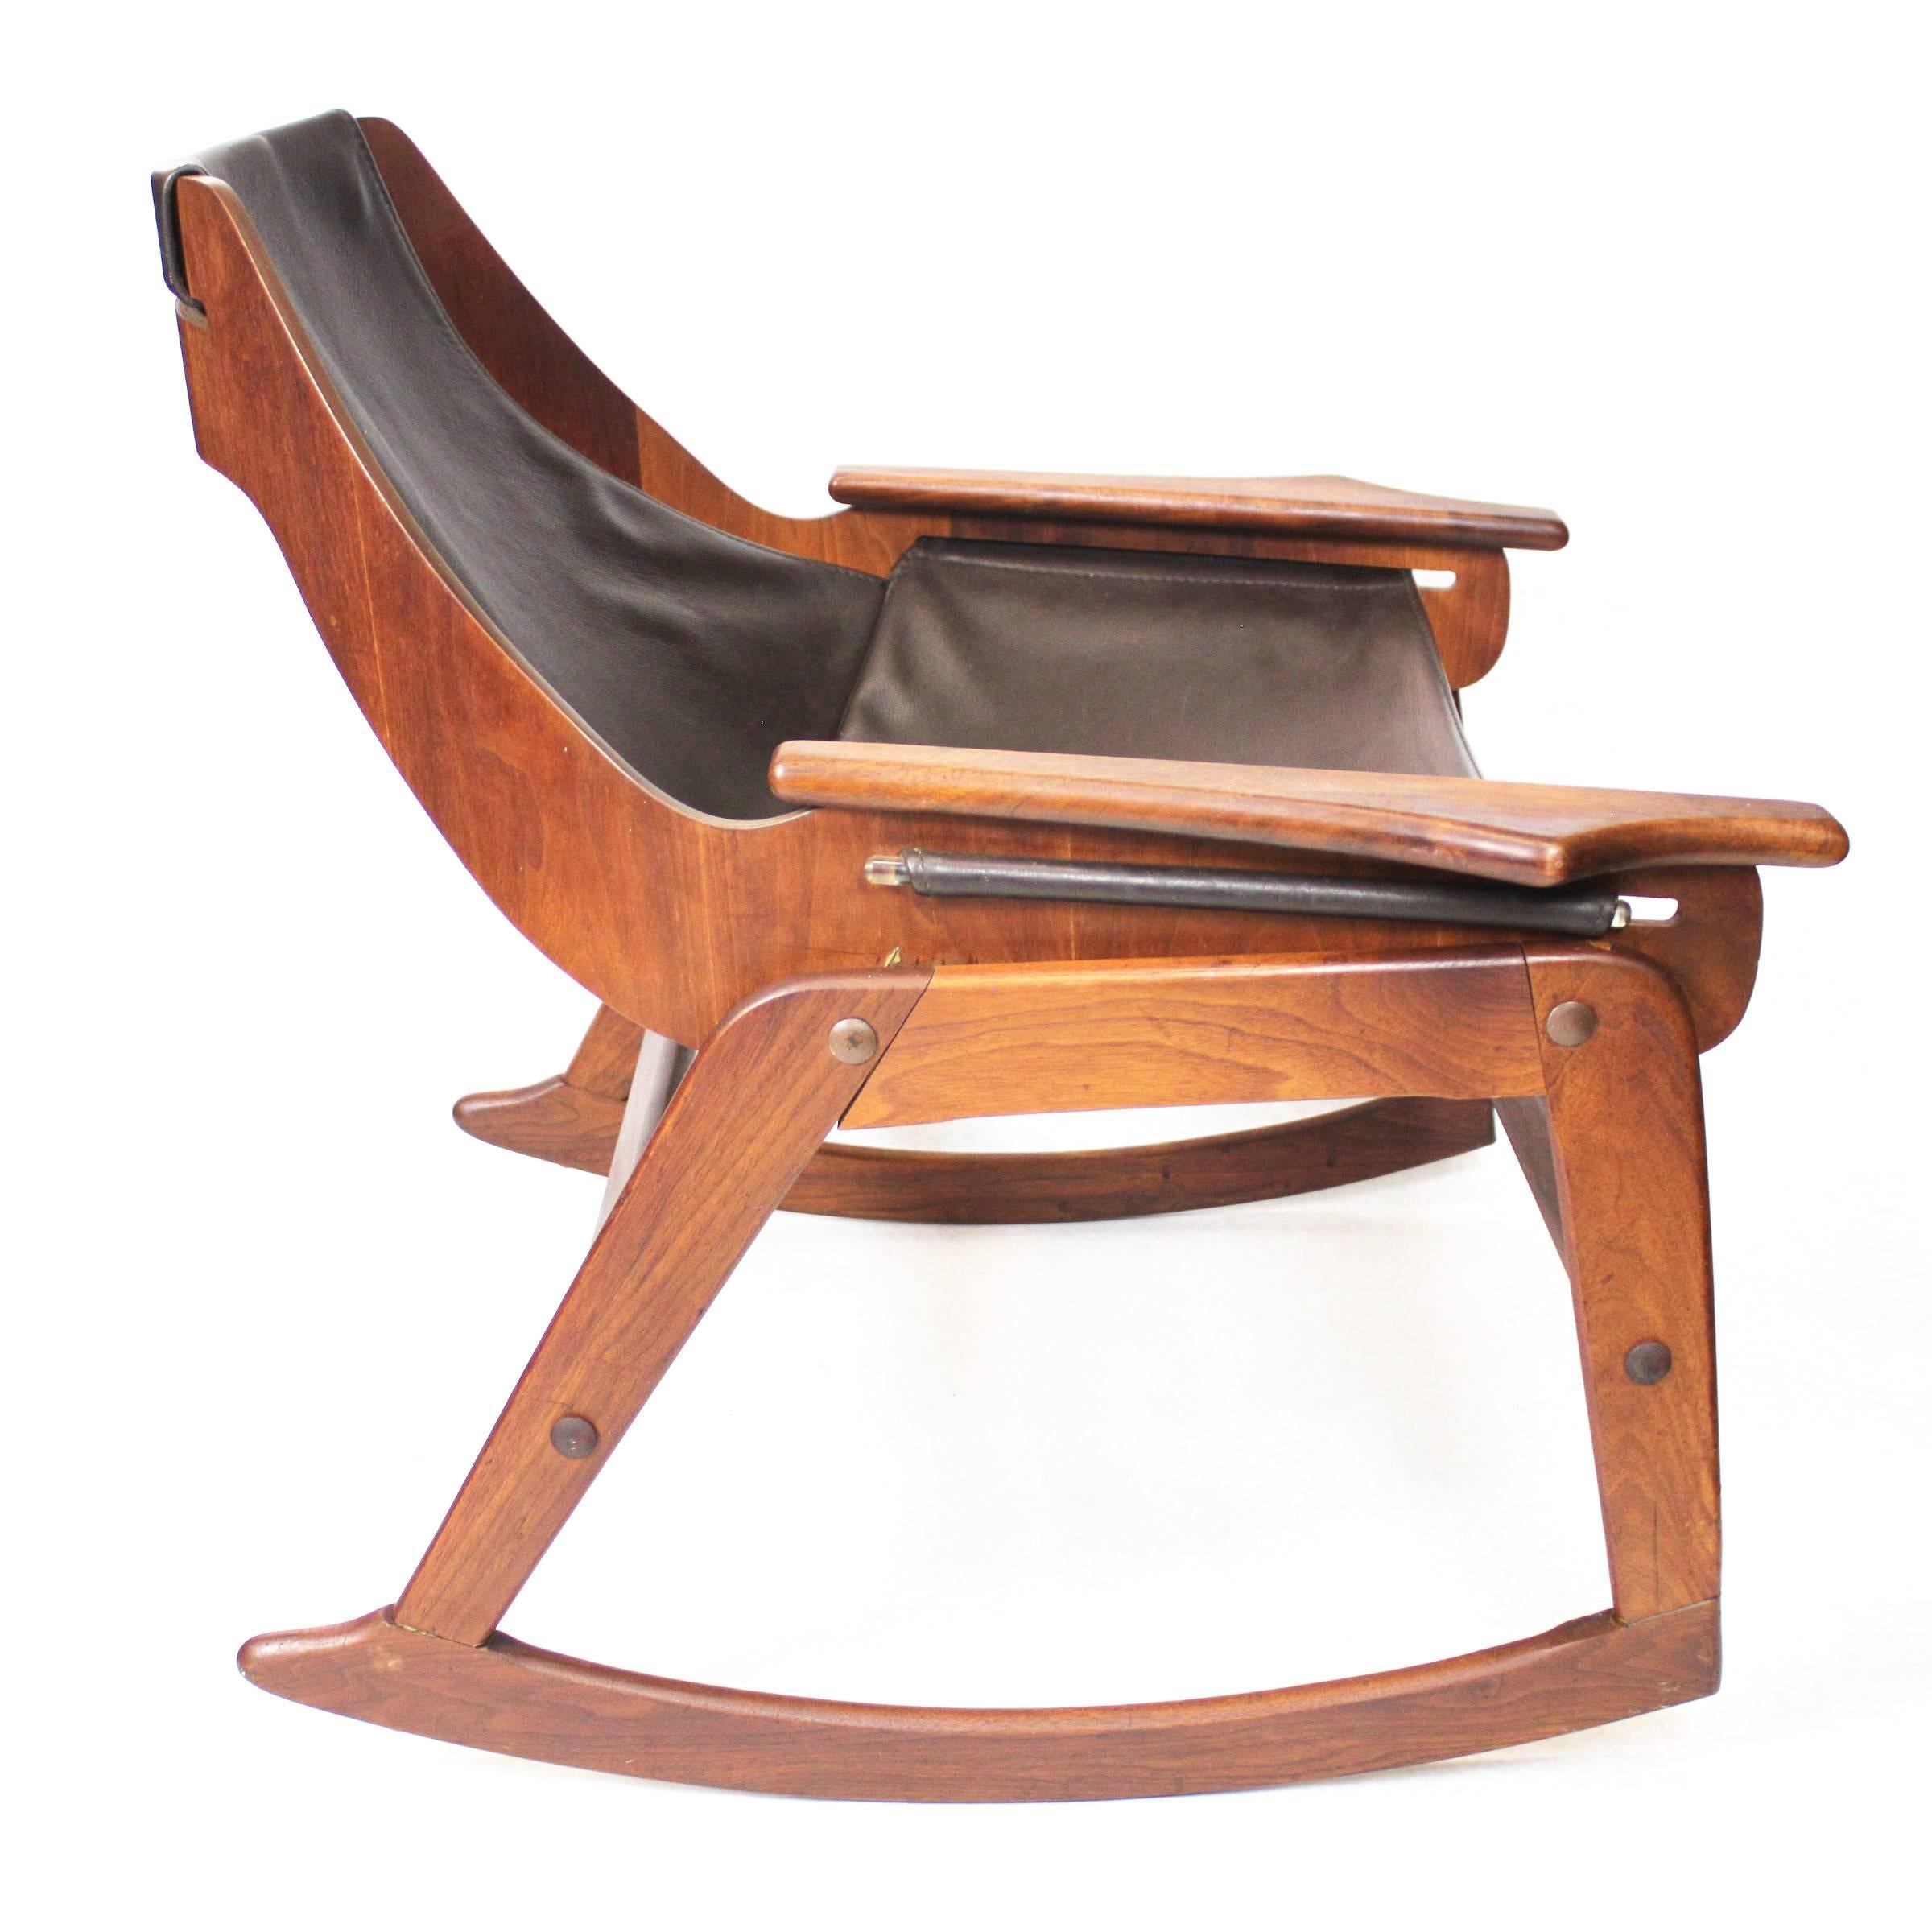 American Mid-Century Modern Bent Plywood Leather Sling Rocking Chair by Jerry Johnson